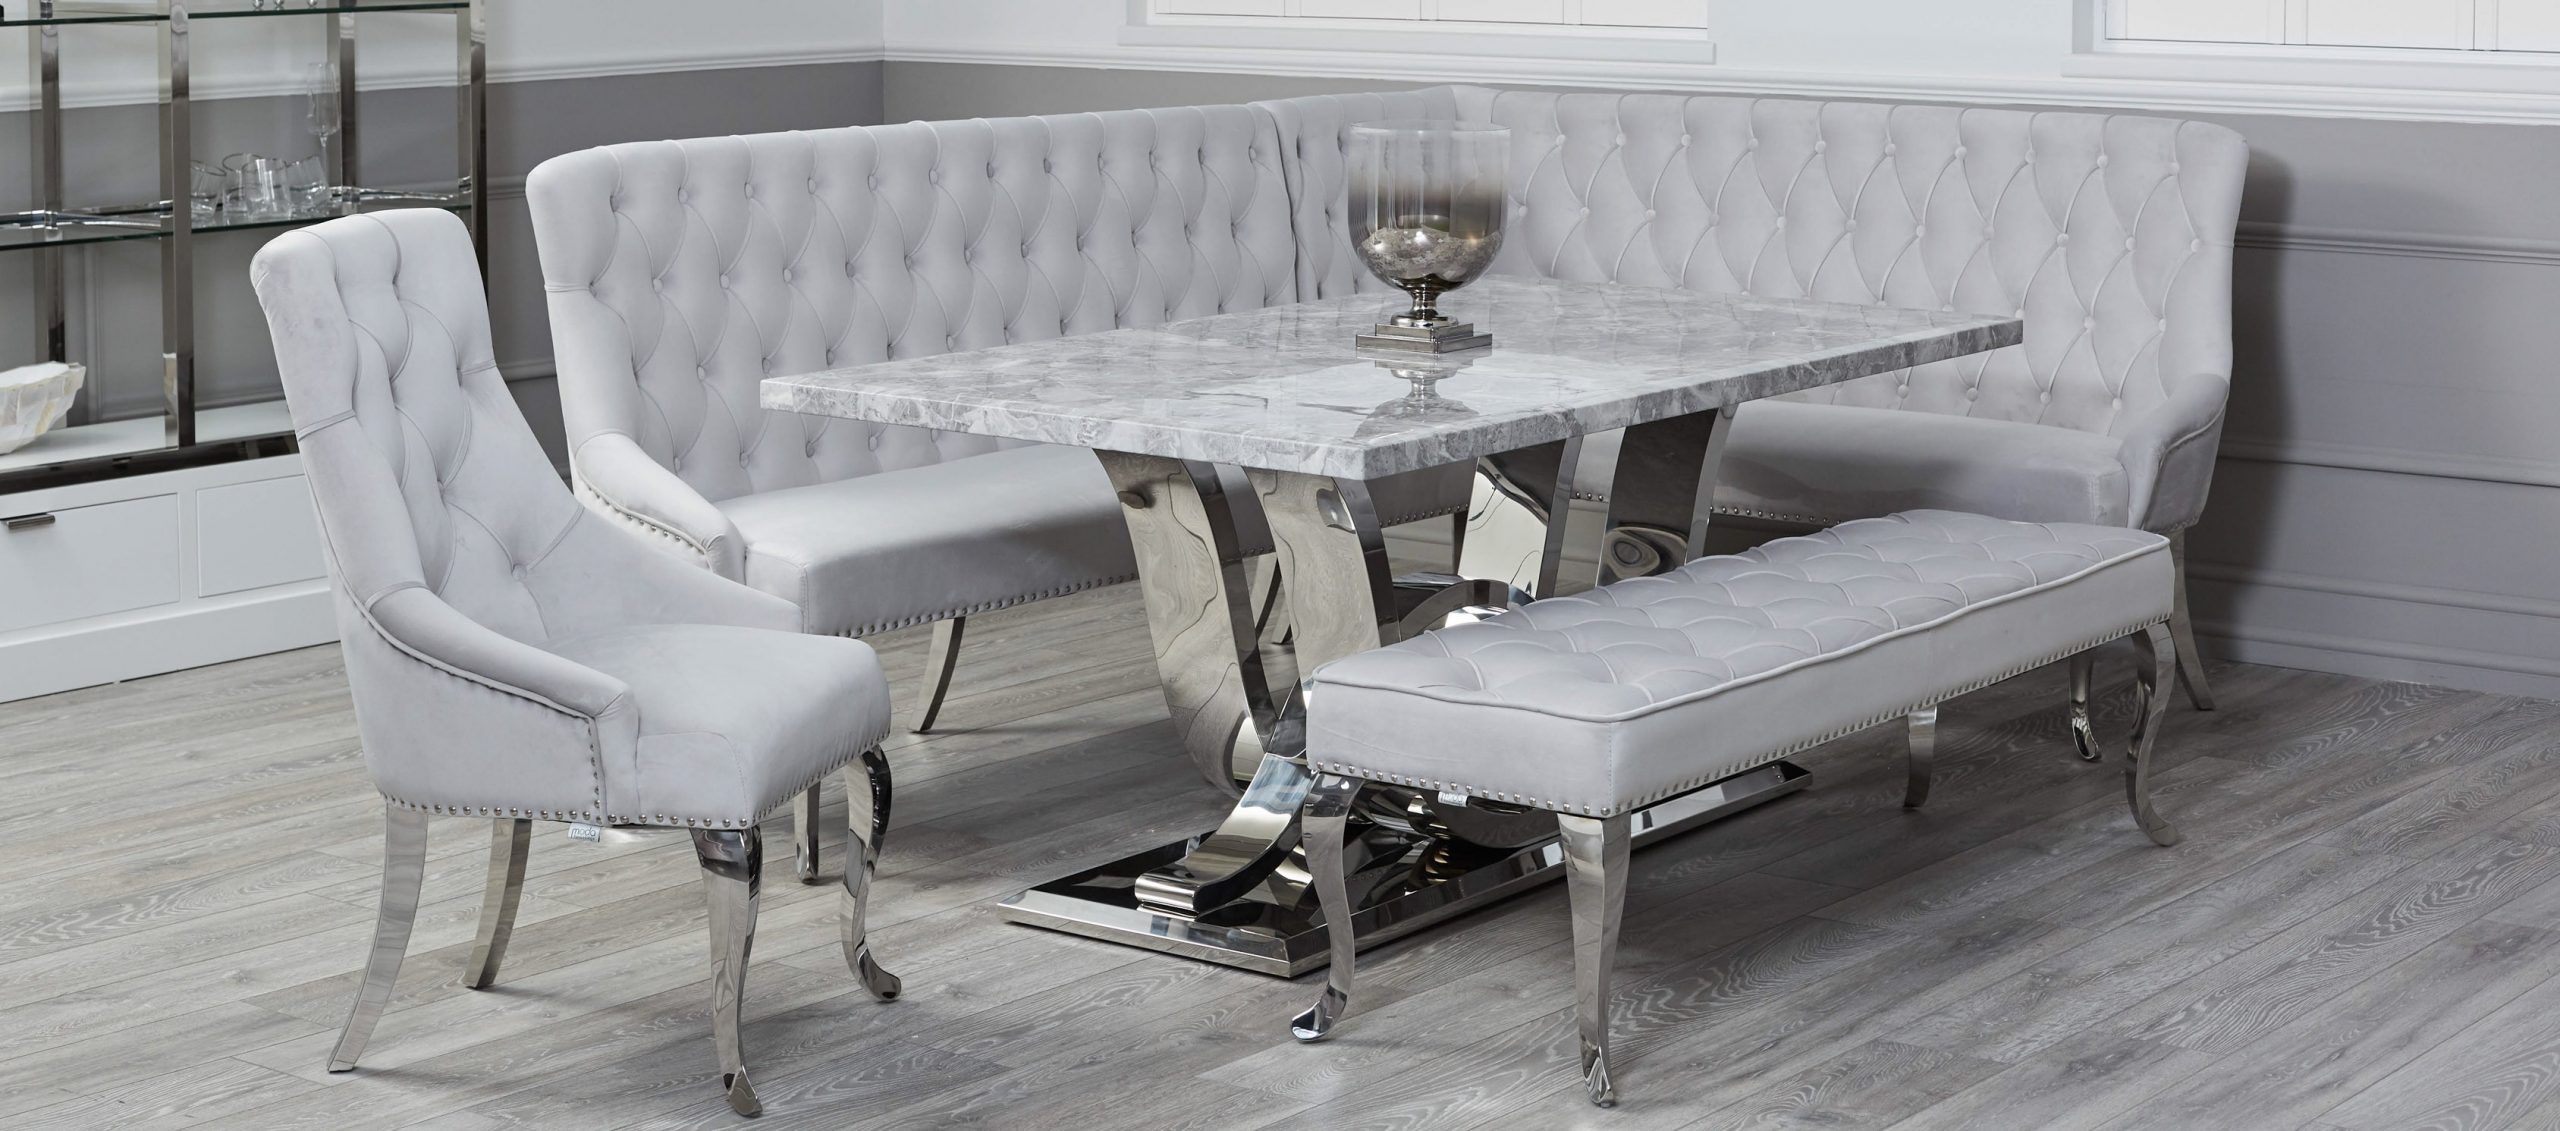 Uxbridge Corner Bench Set With 18m Grey Dining Table intended for dimensions 3375 X 1491